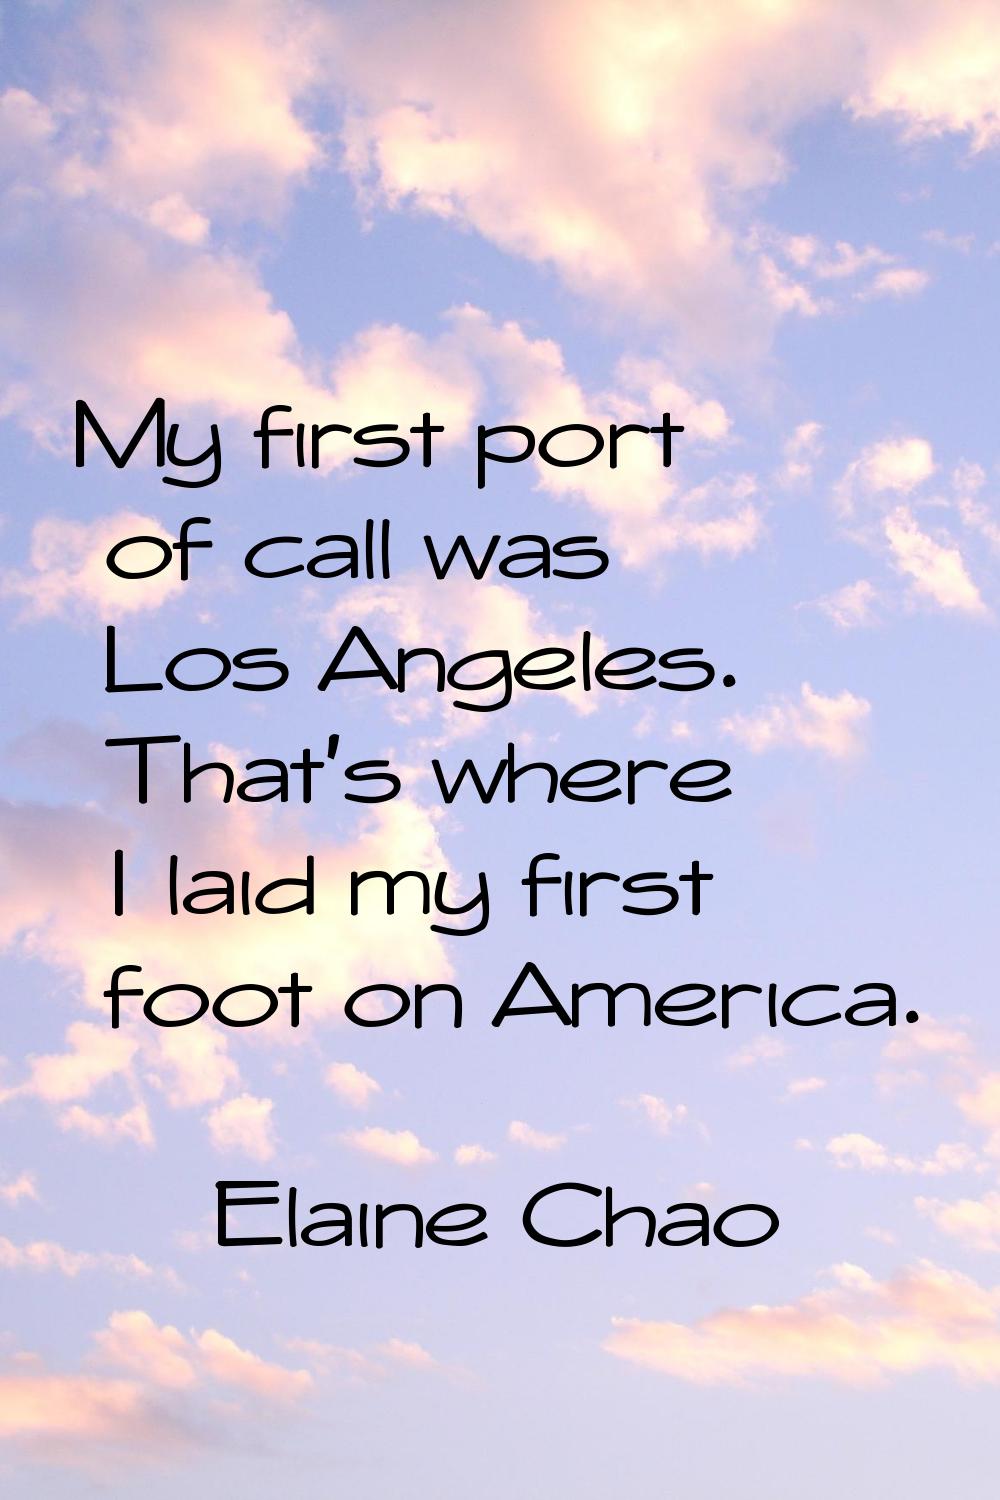 My first port of call was Los Angeles. That's where I laid my first foot on America.